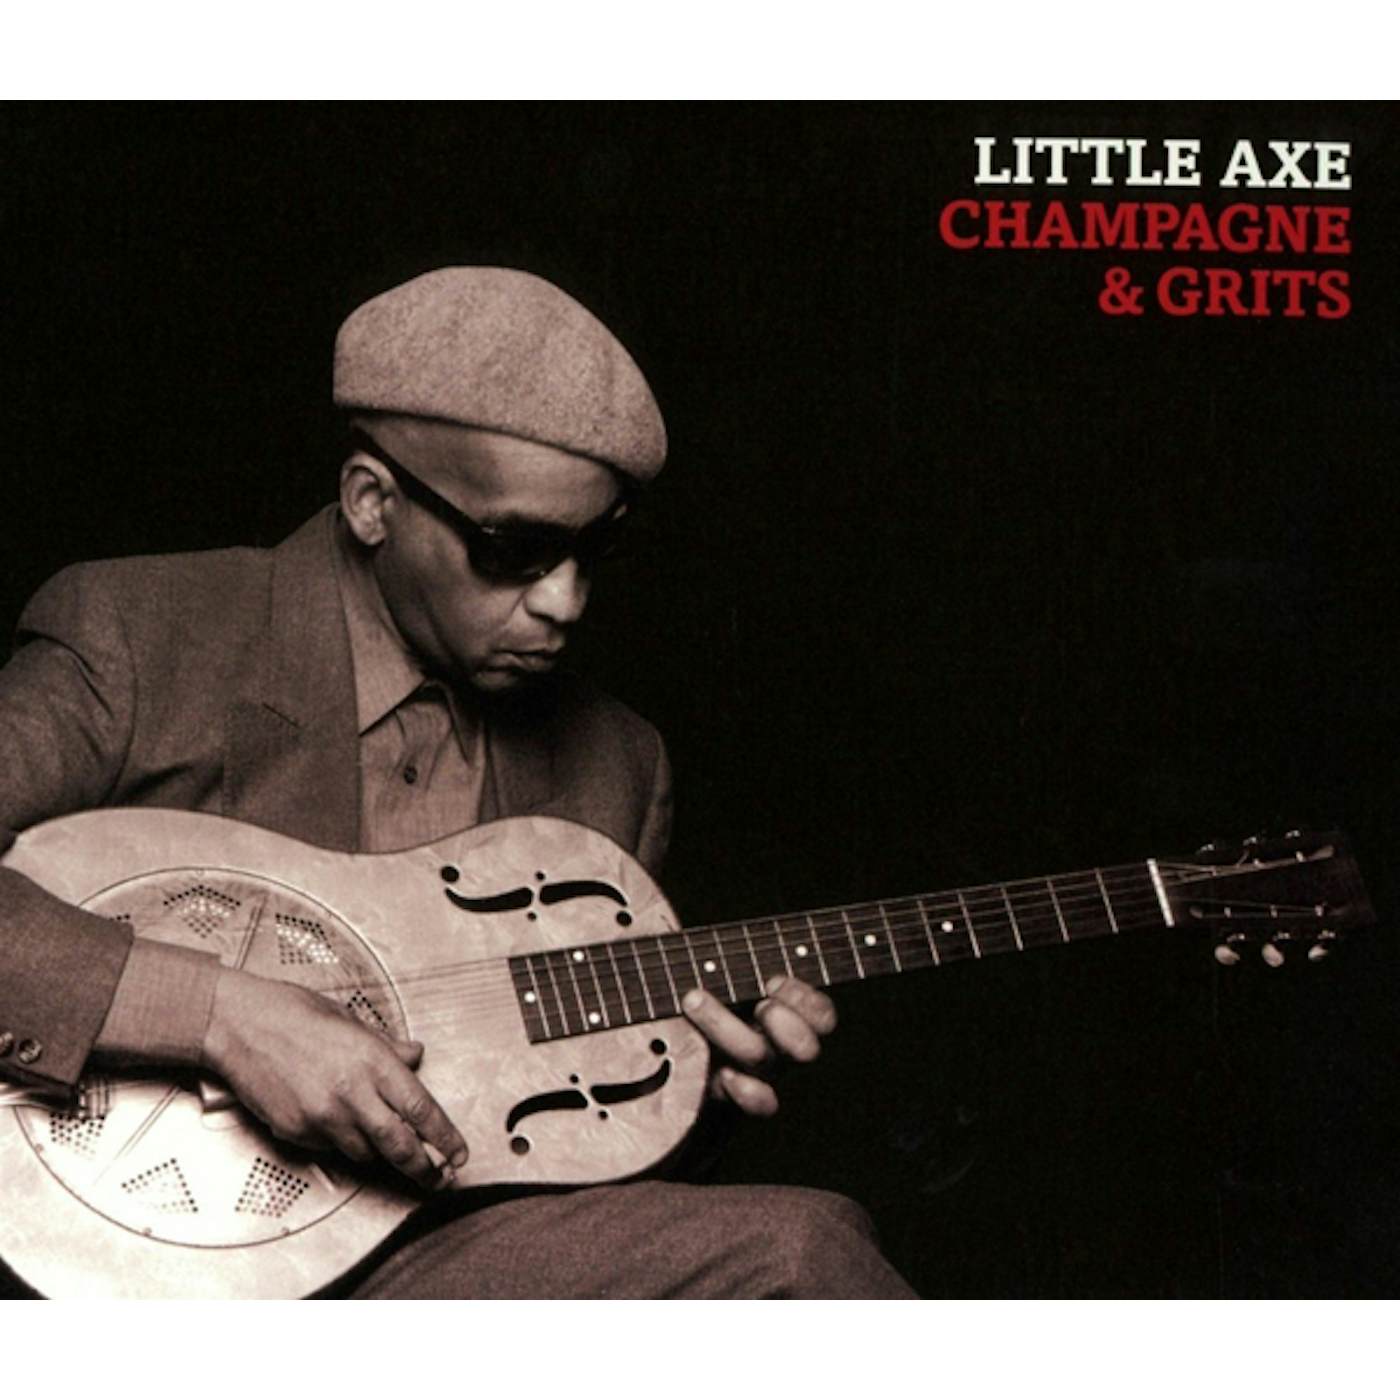 Little Axe Champagne and Grits Vinyl Record